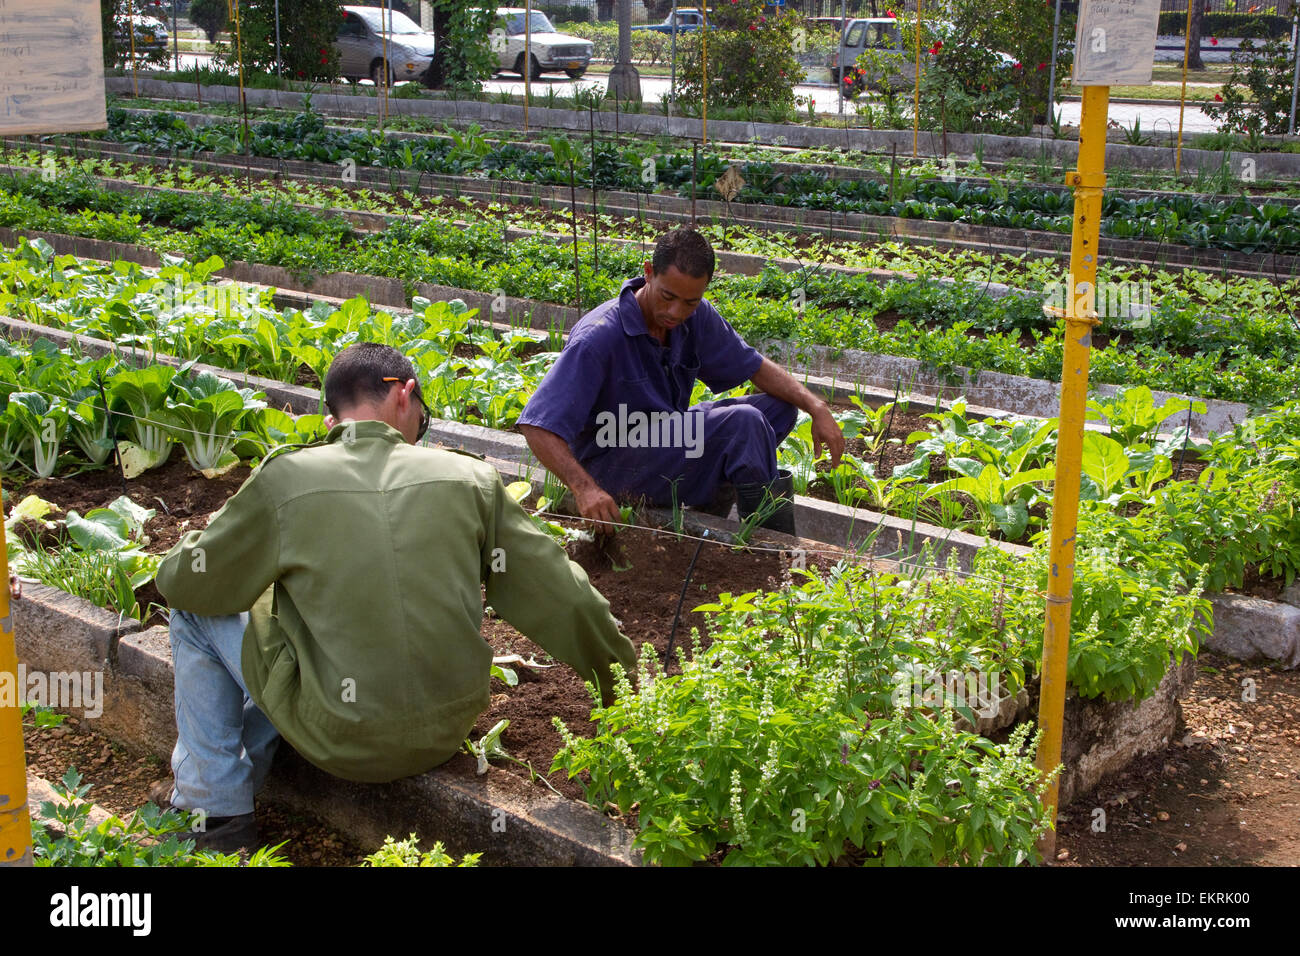 Community allotments known as 'organiponicos' in a suburb of Havana where people grow fruits and vegetables Stock Photo